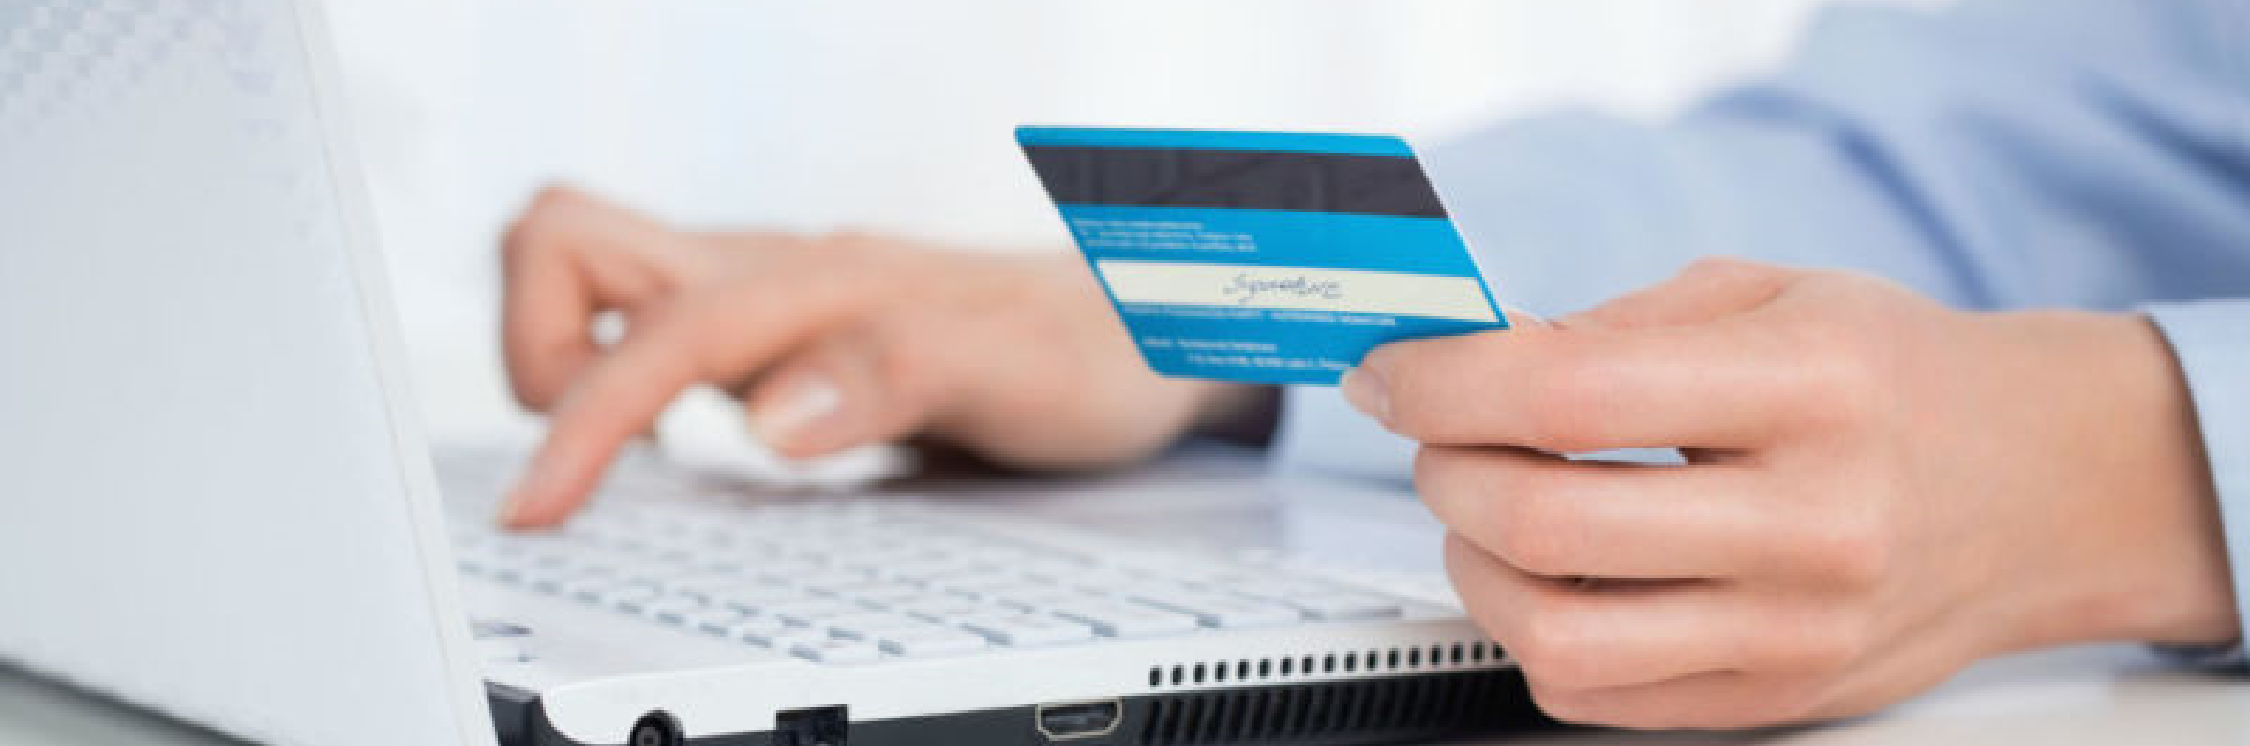 Man typing on laptop while holding a credit card